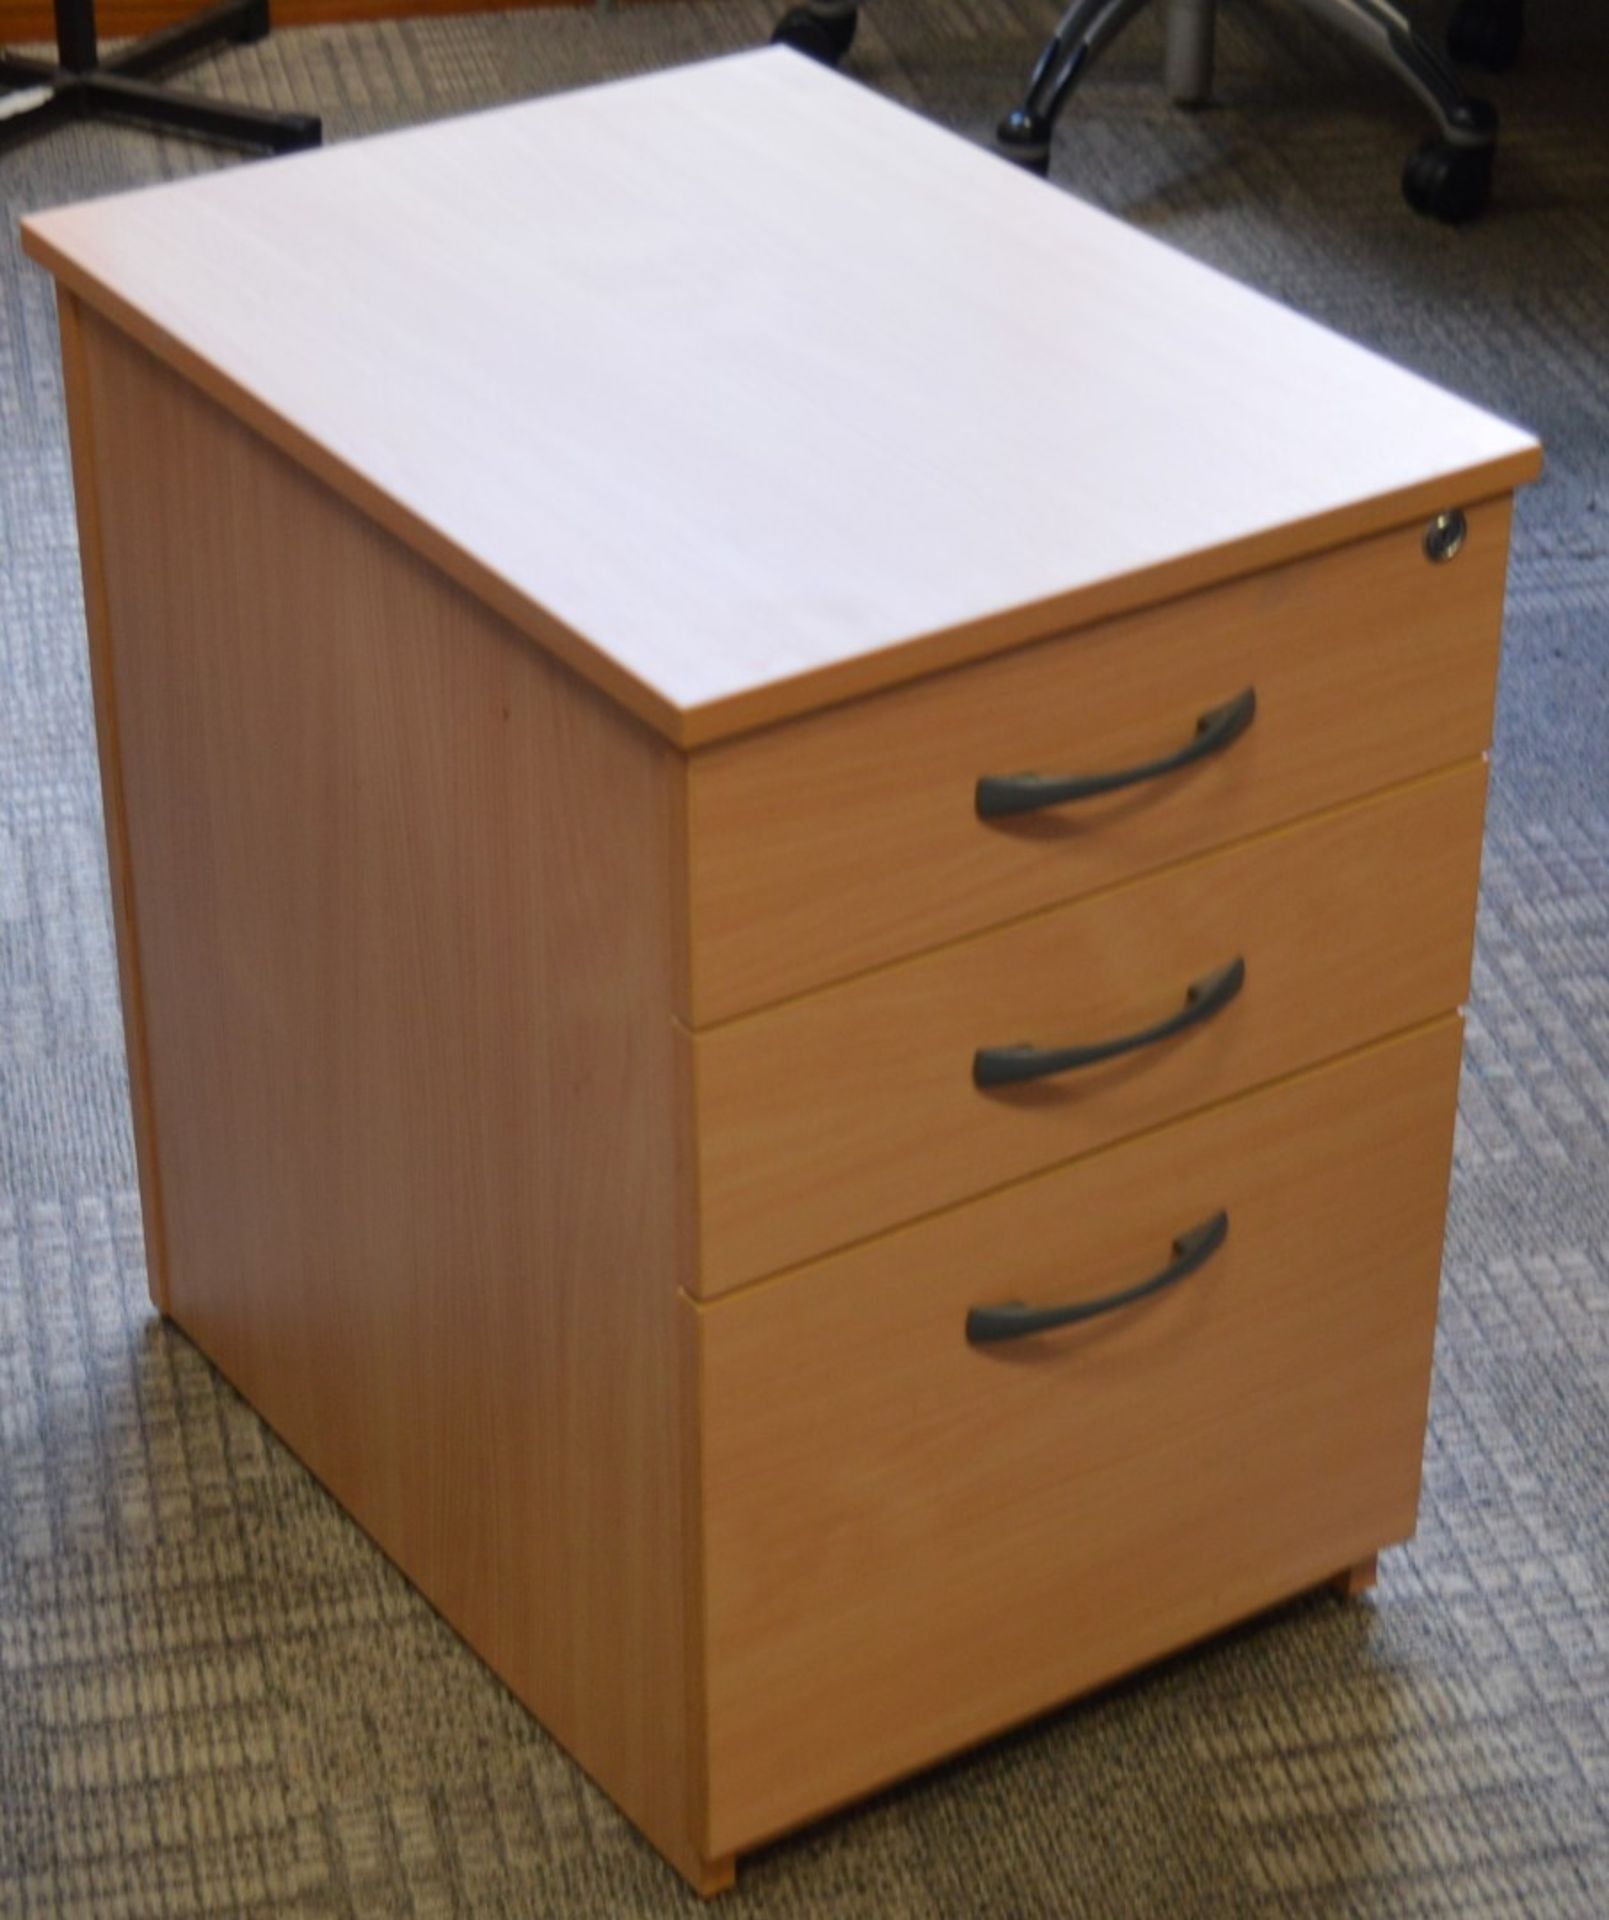 1 x Three Drawer Mobile Pedestal Drawers - With Key - Modern Beech Finish - Two Storage Drawers - Image 2 of 5